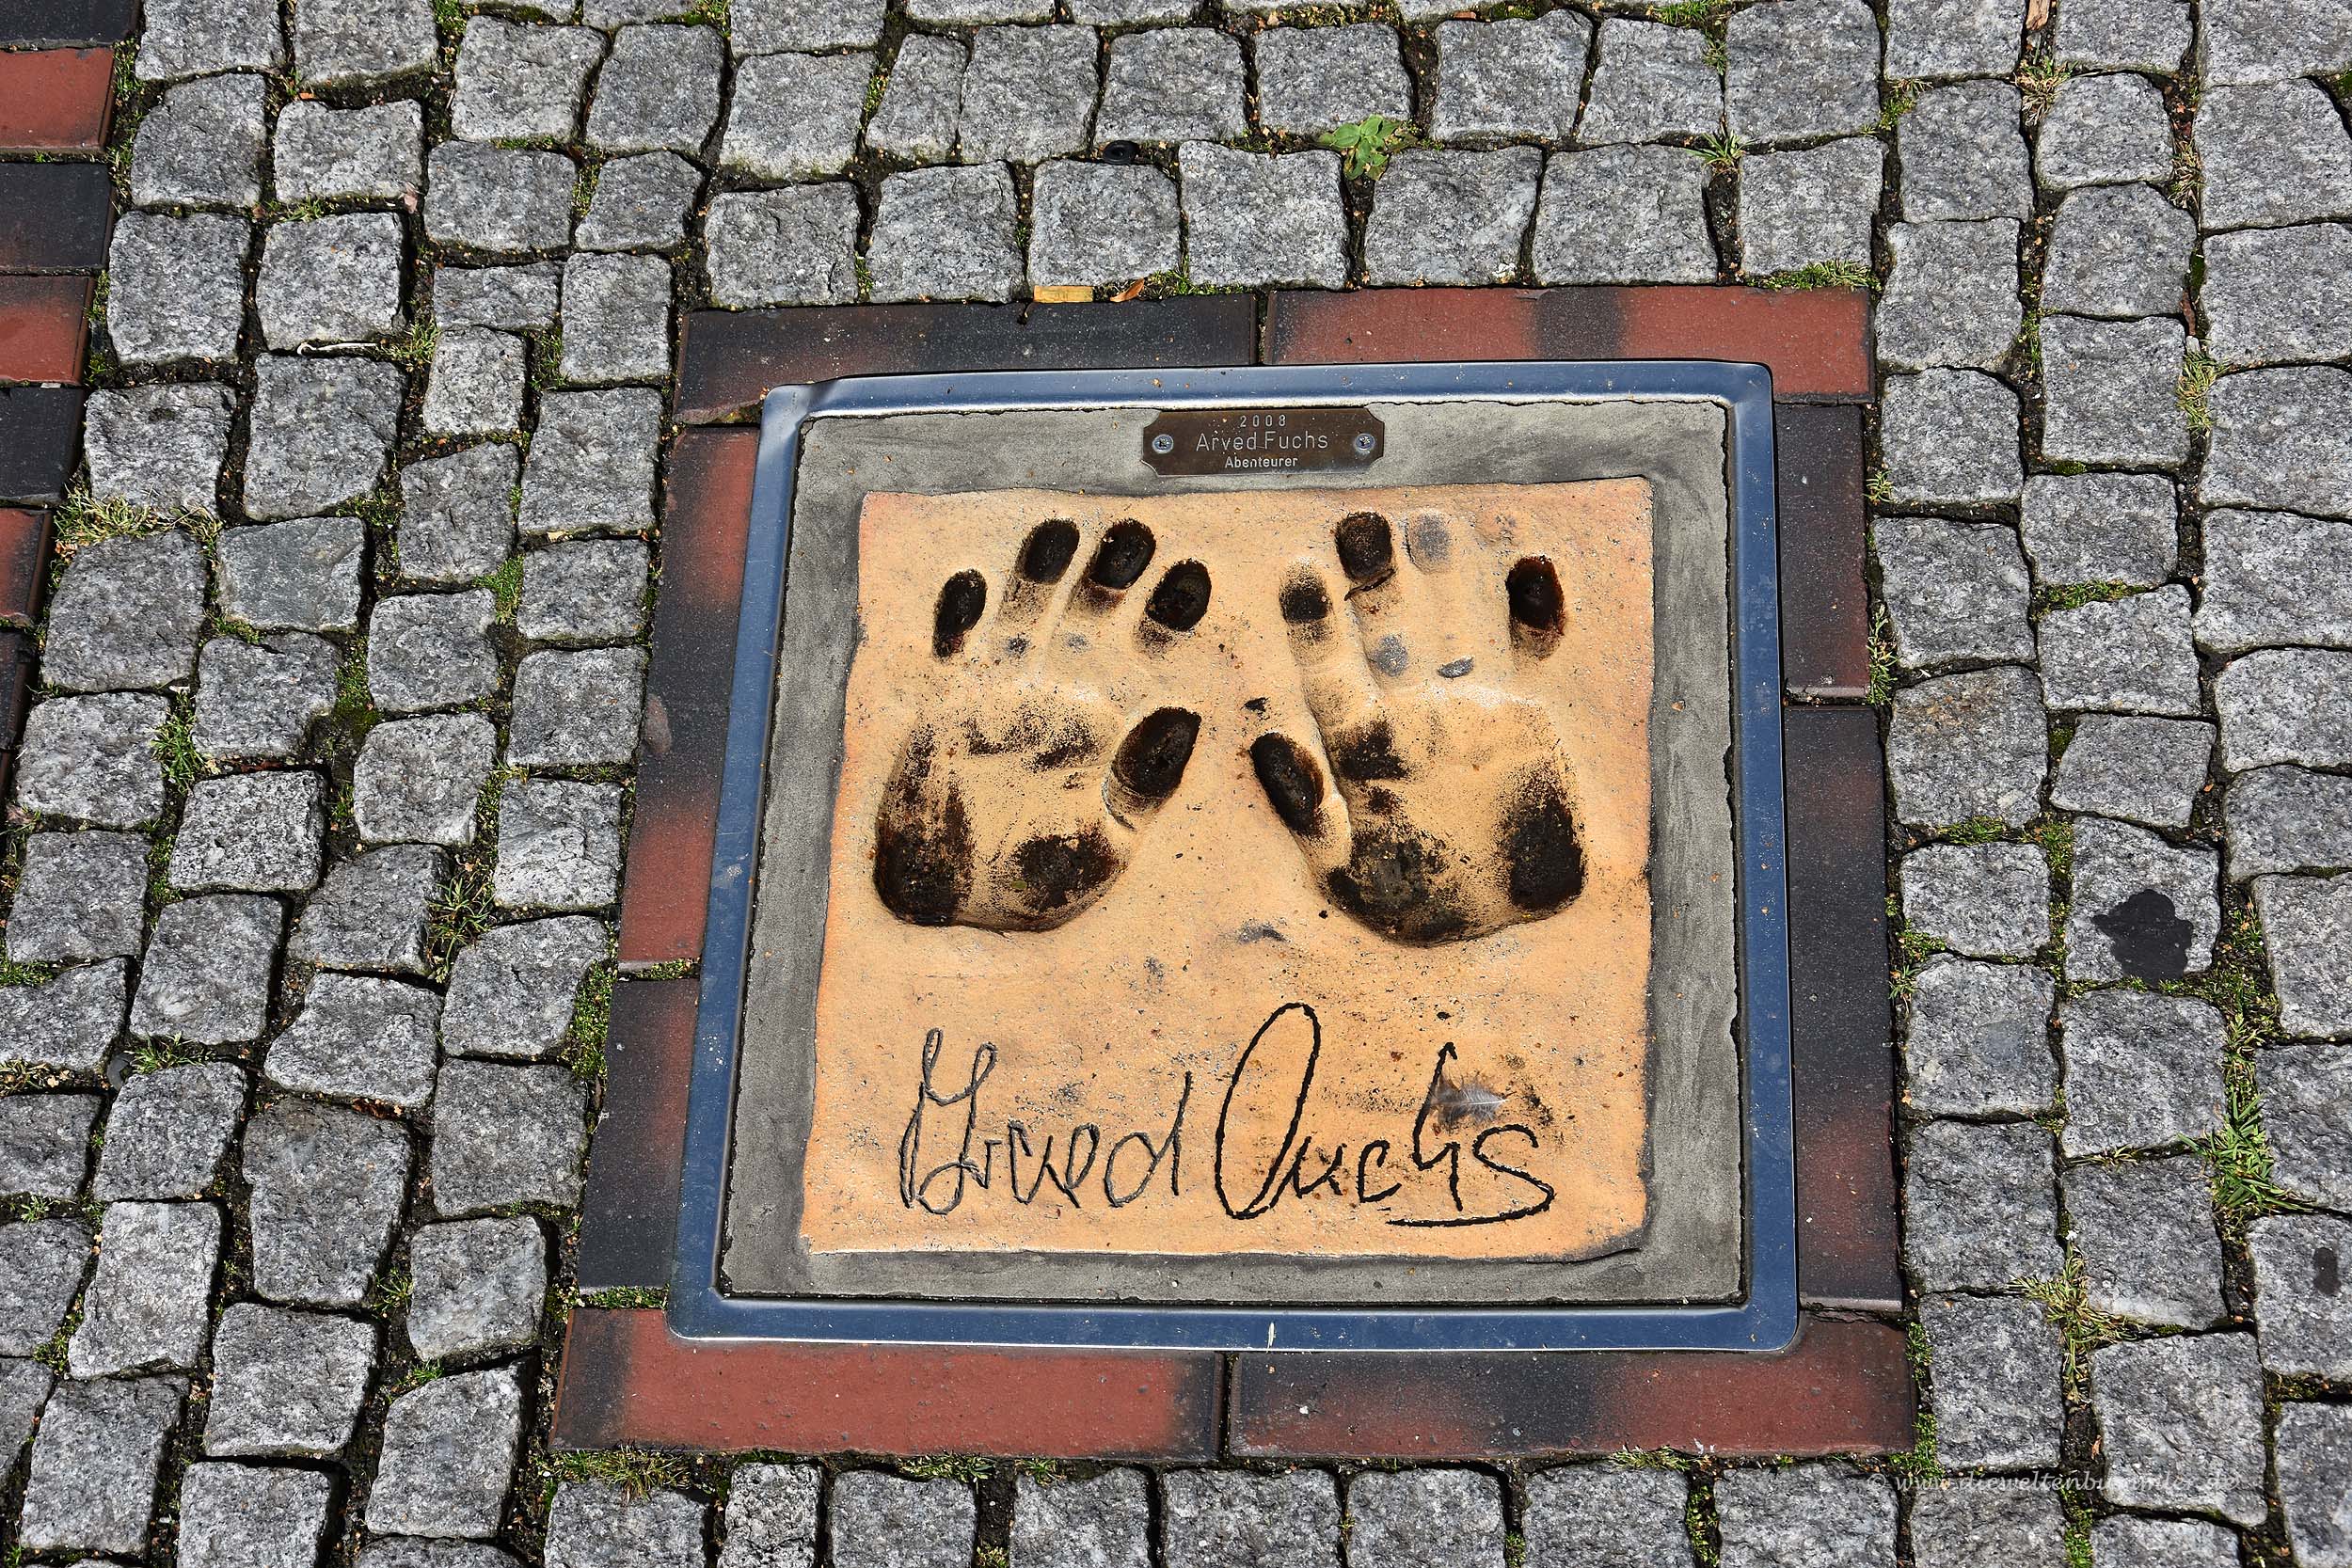 Hand of Fame in Wittmund